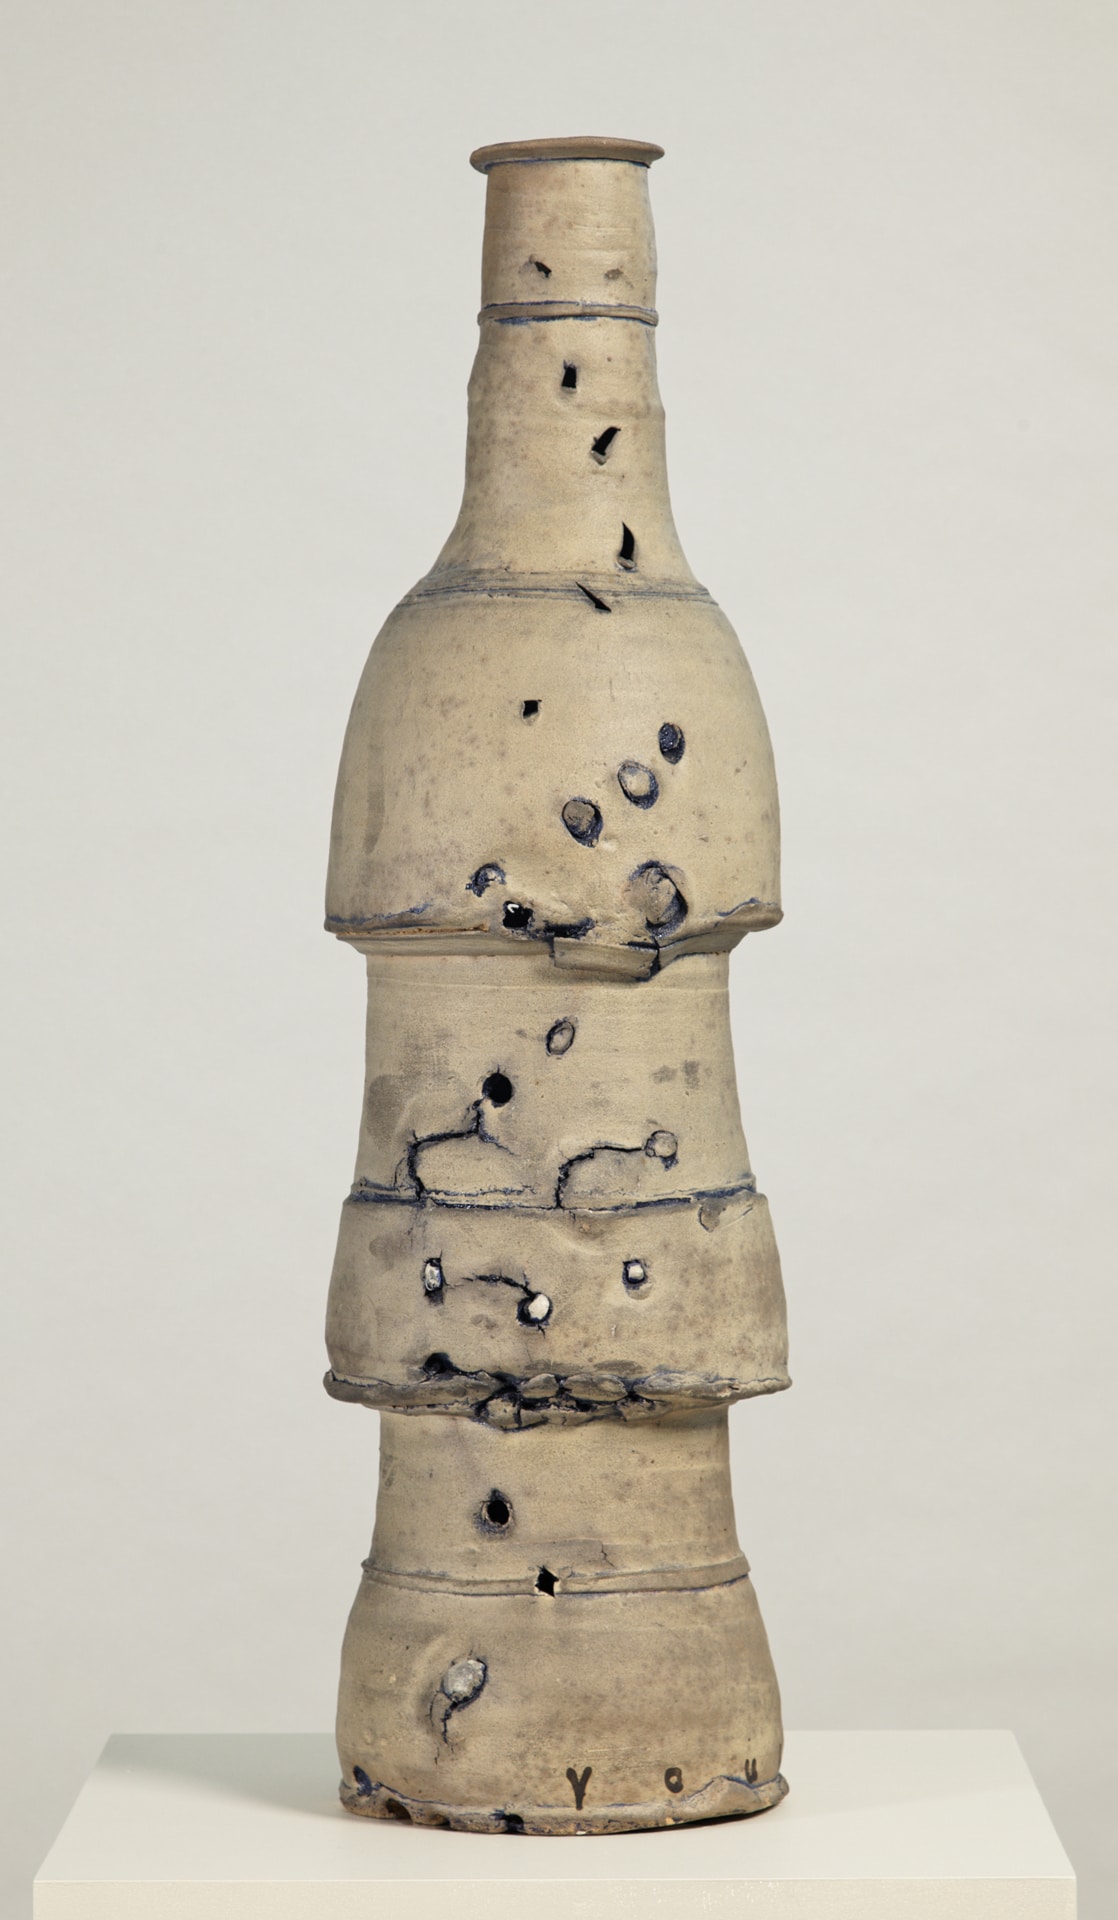 a tall ceramic vessel, colored beige, its surface is punctured